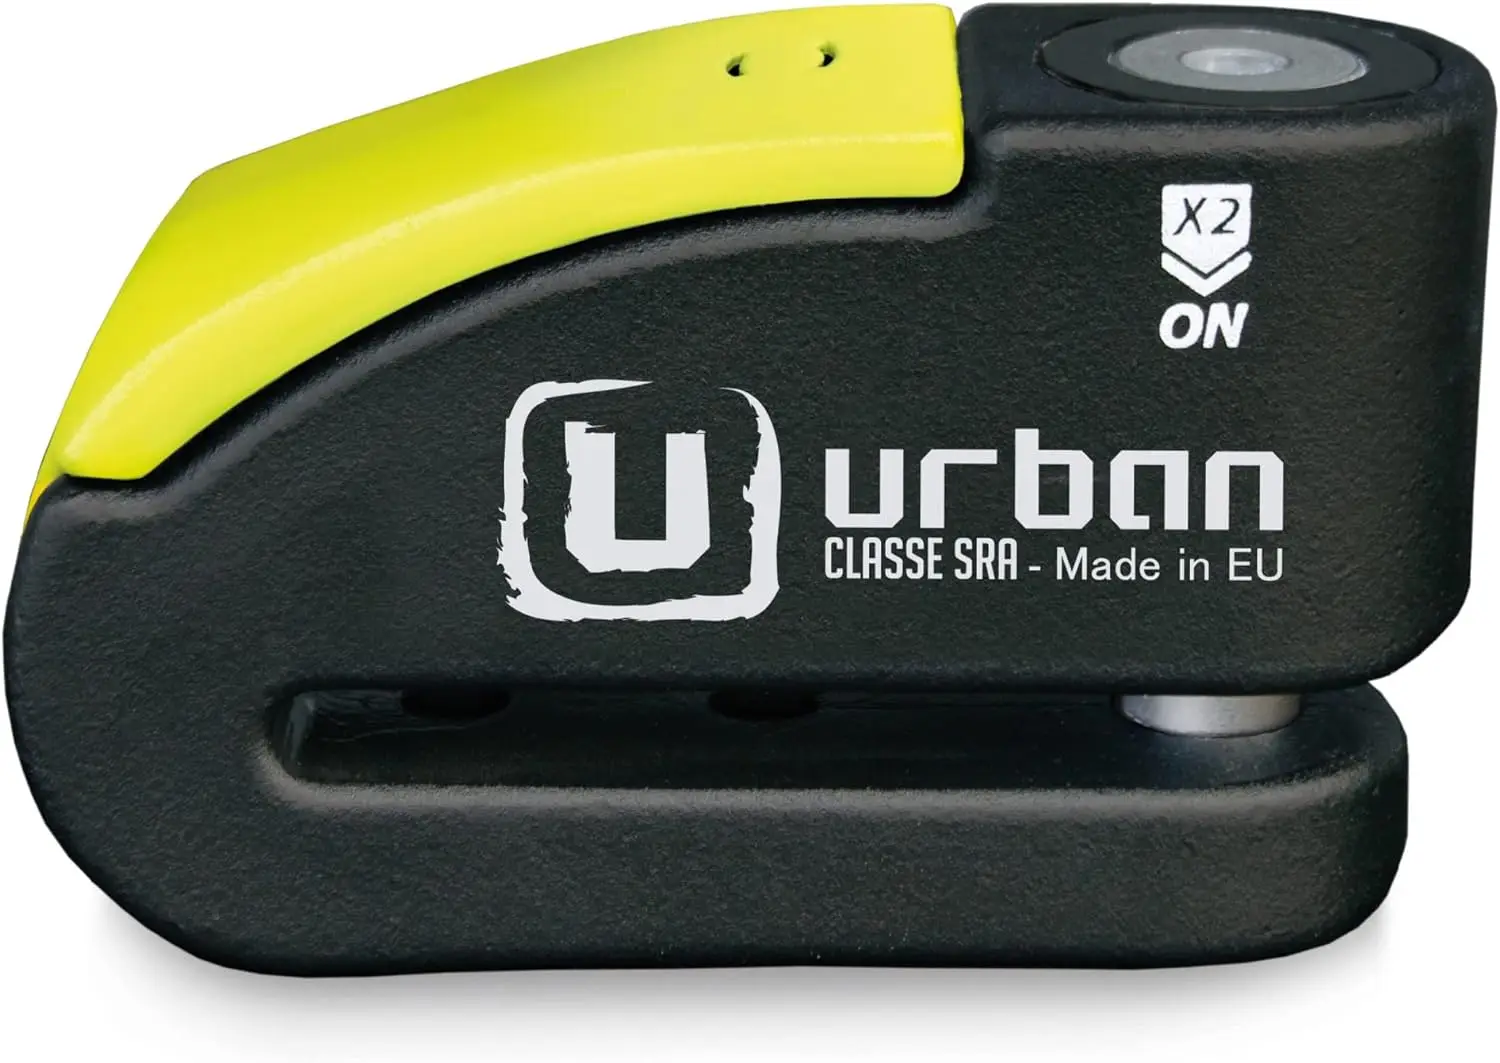 

Urban 999 Motorcycle Disc Lock with or Without Alarm 120dB LED, Approved SRA, Hi-Tech Warning A+ Sensitivity, High Security